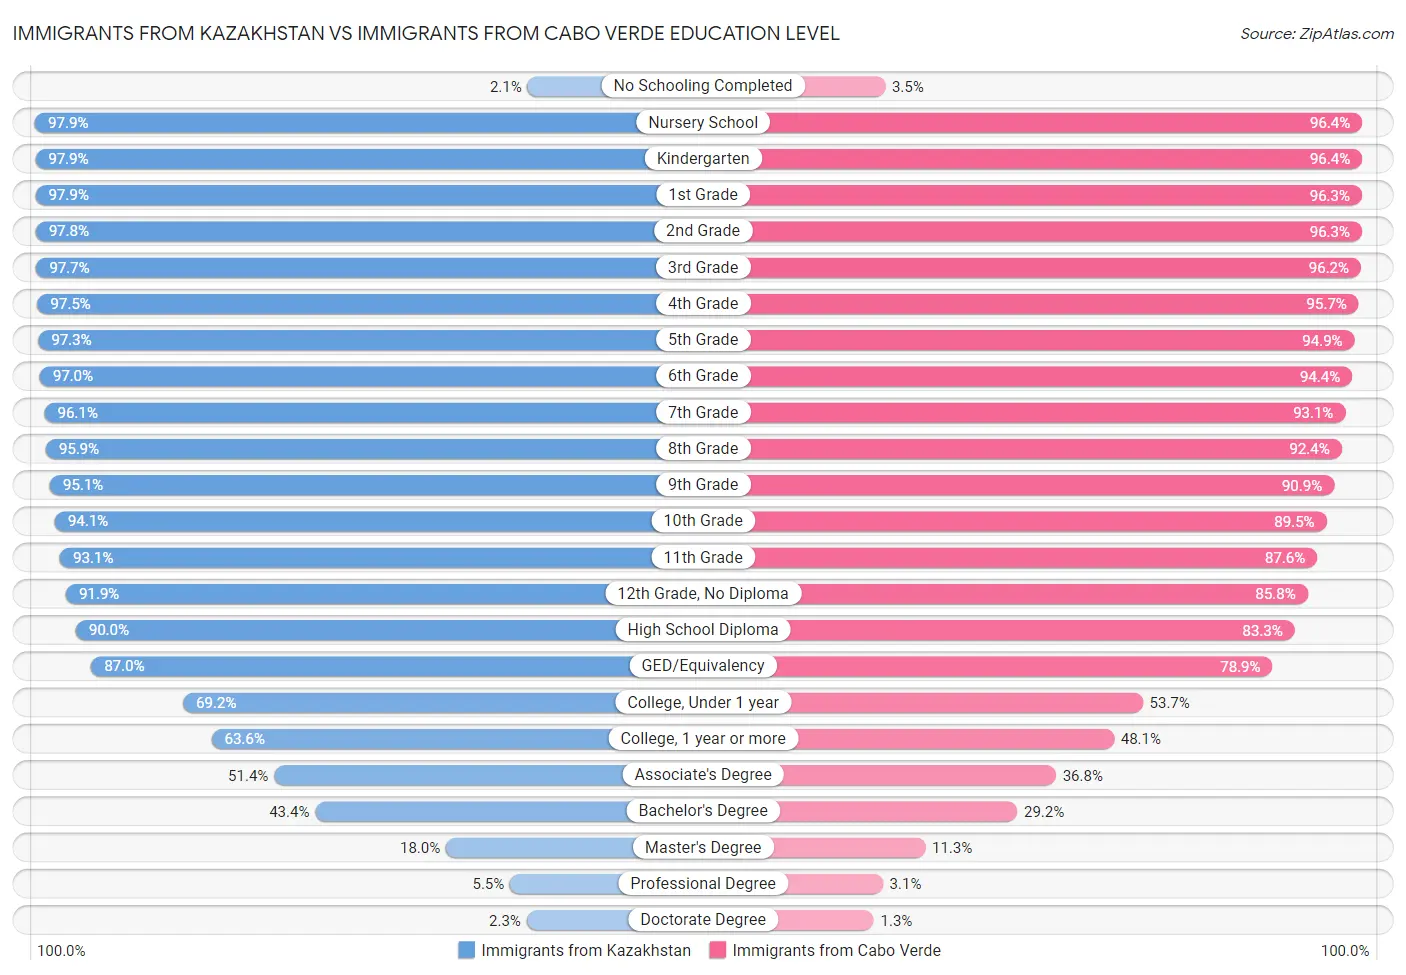 Immigrants from Kazakhstan vs Immigrants from Cabo Verde Education Level